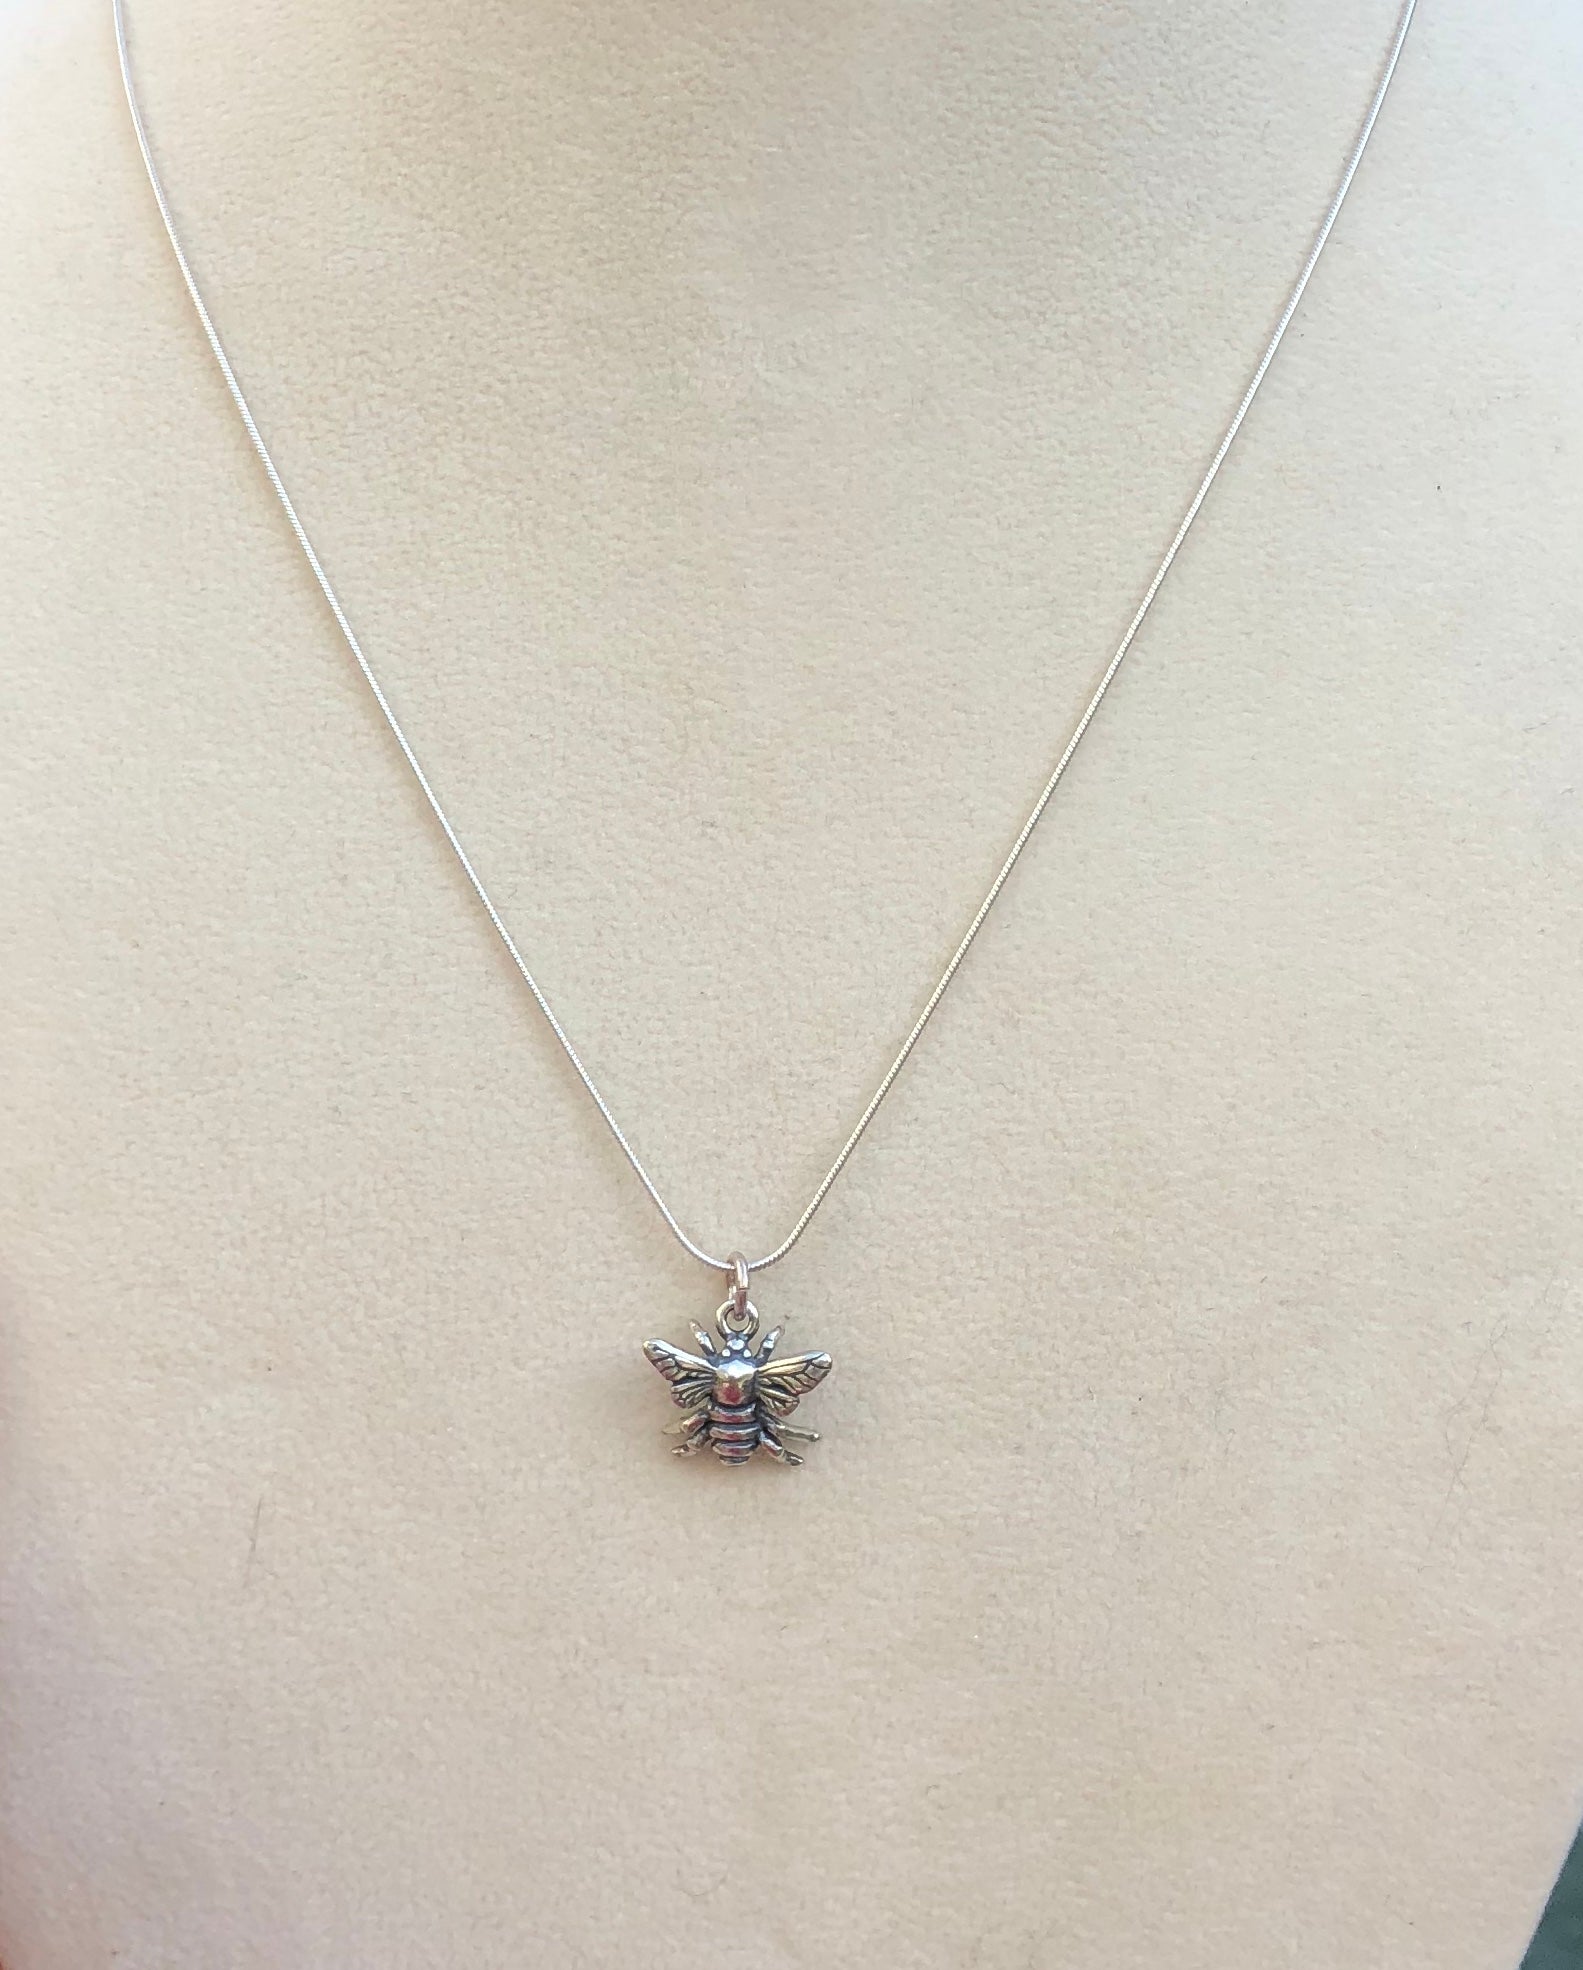 Sterling Silver Bee Necklace